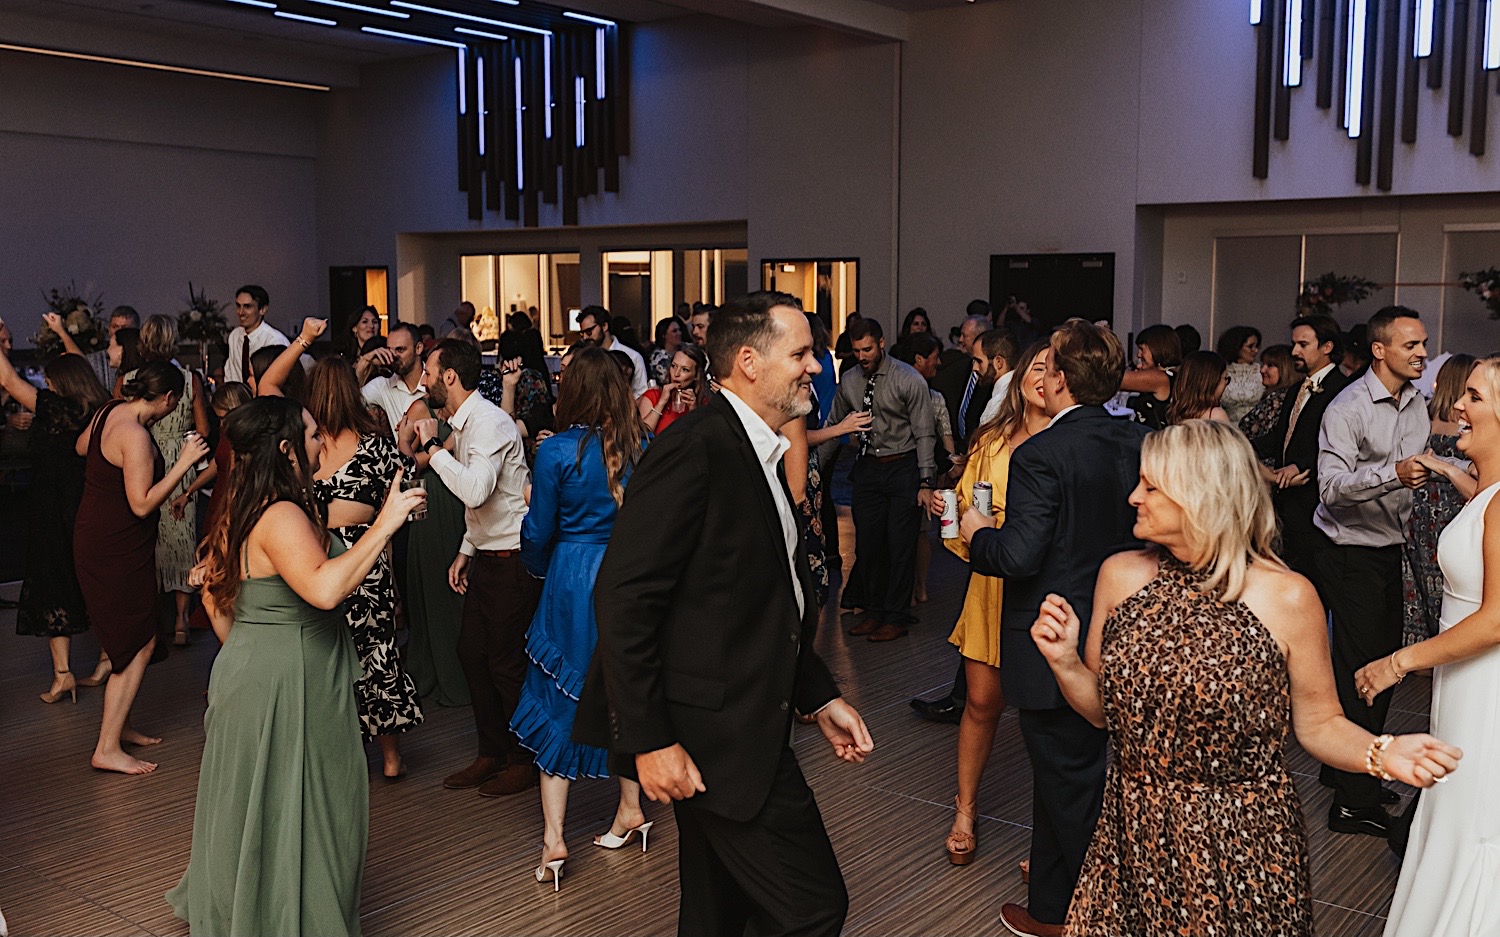 Guests of a wedding reception at the La Crosse Center pack the dance floor